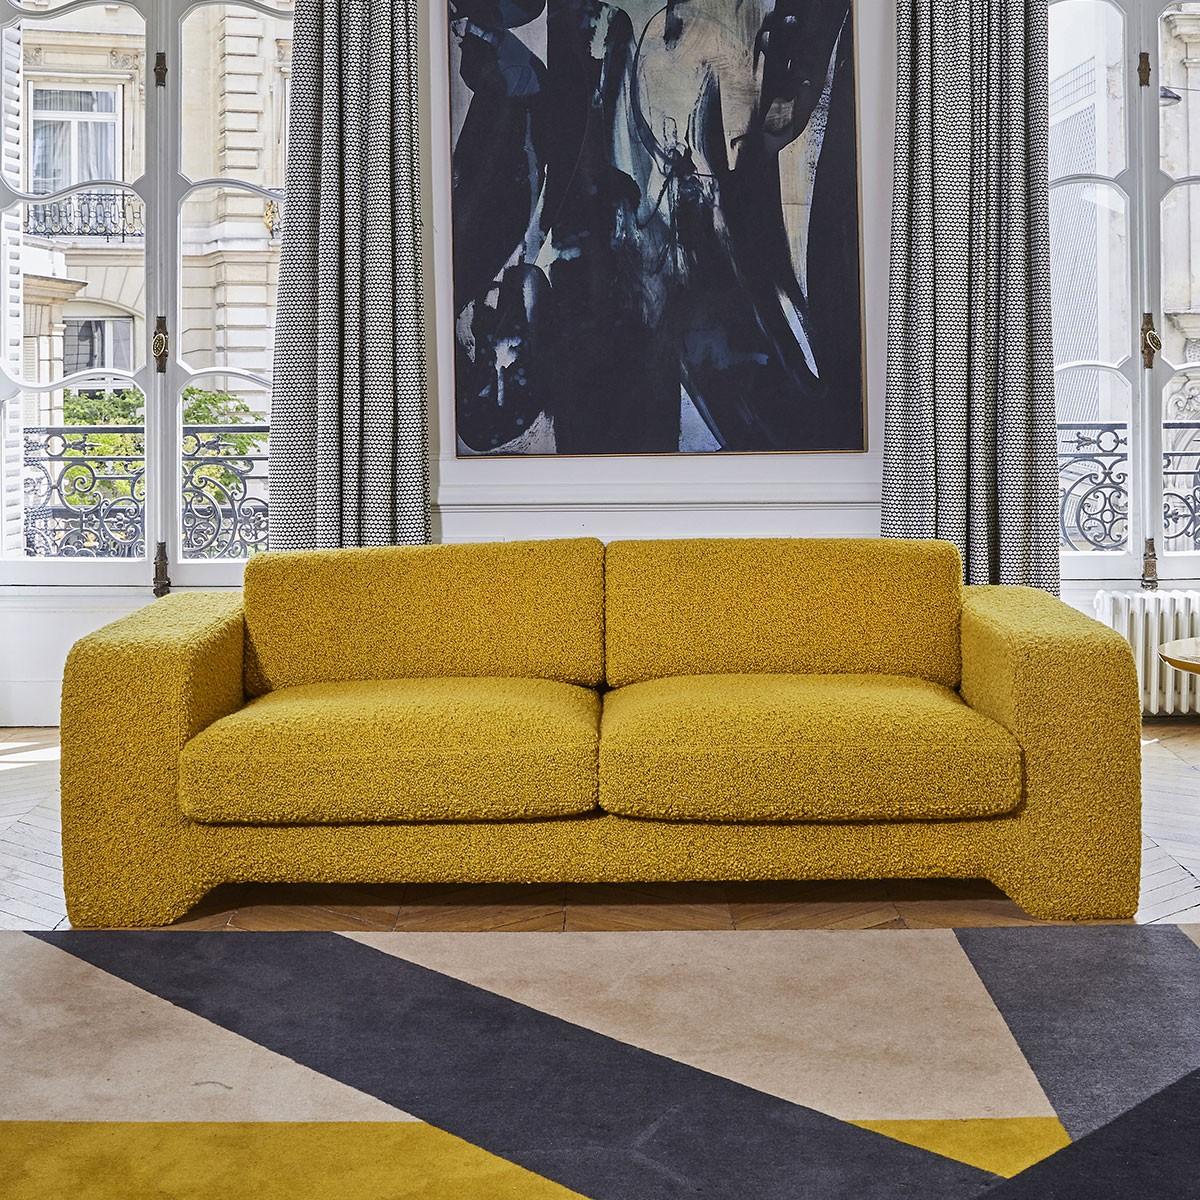 Popus Editions Giovanna 3 Seater Sofa in Egg Shell Off-White Como Velvet Fabric

Giovanna is a sofa with a strong profile. A sober, plush line, with this famous detail that changes everything, so as not to forget its strength of character and this